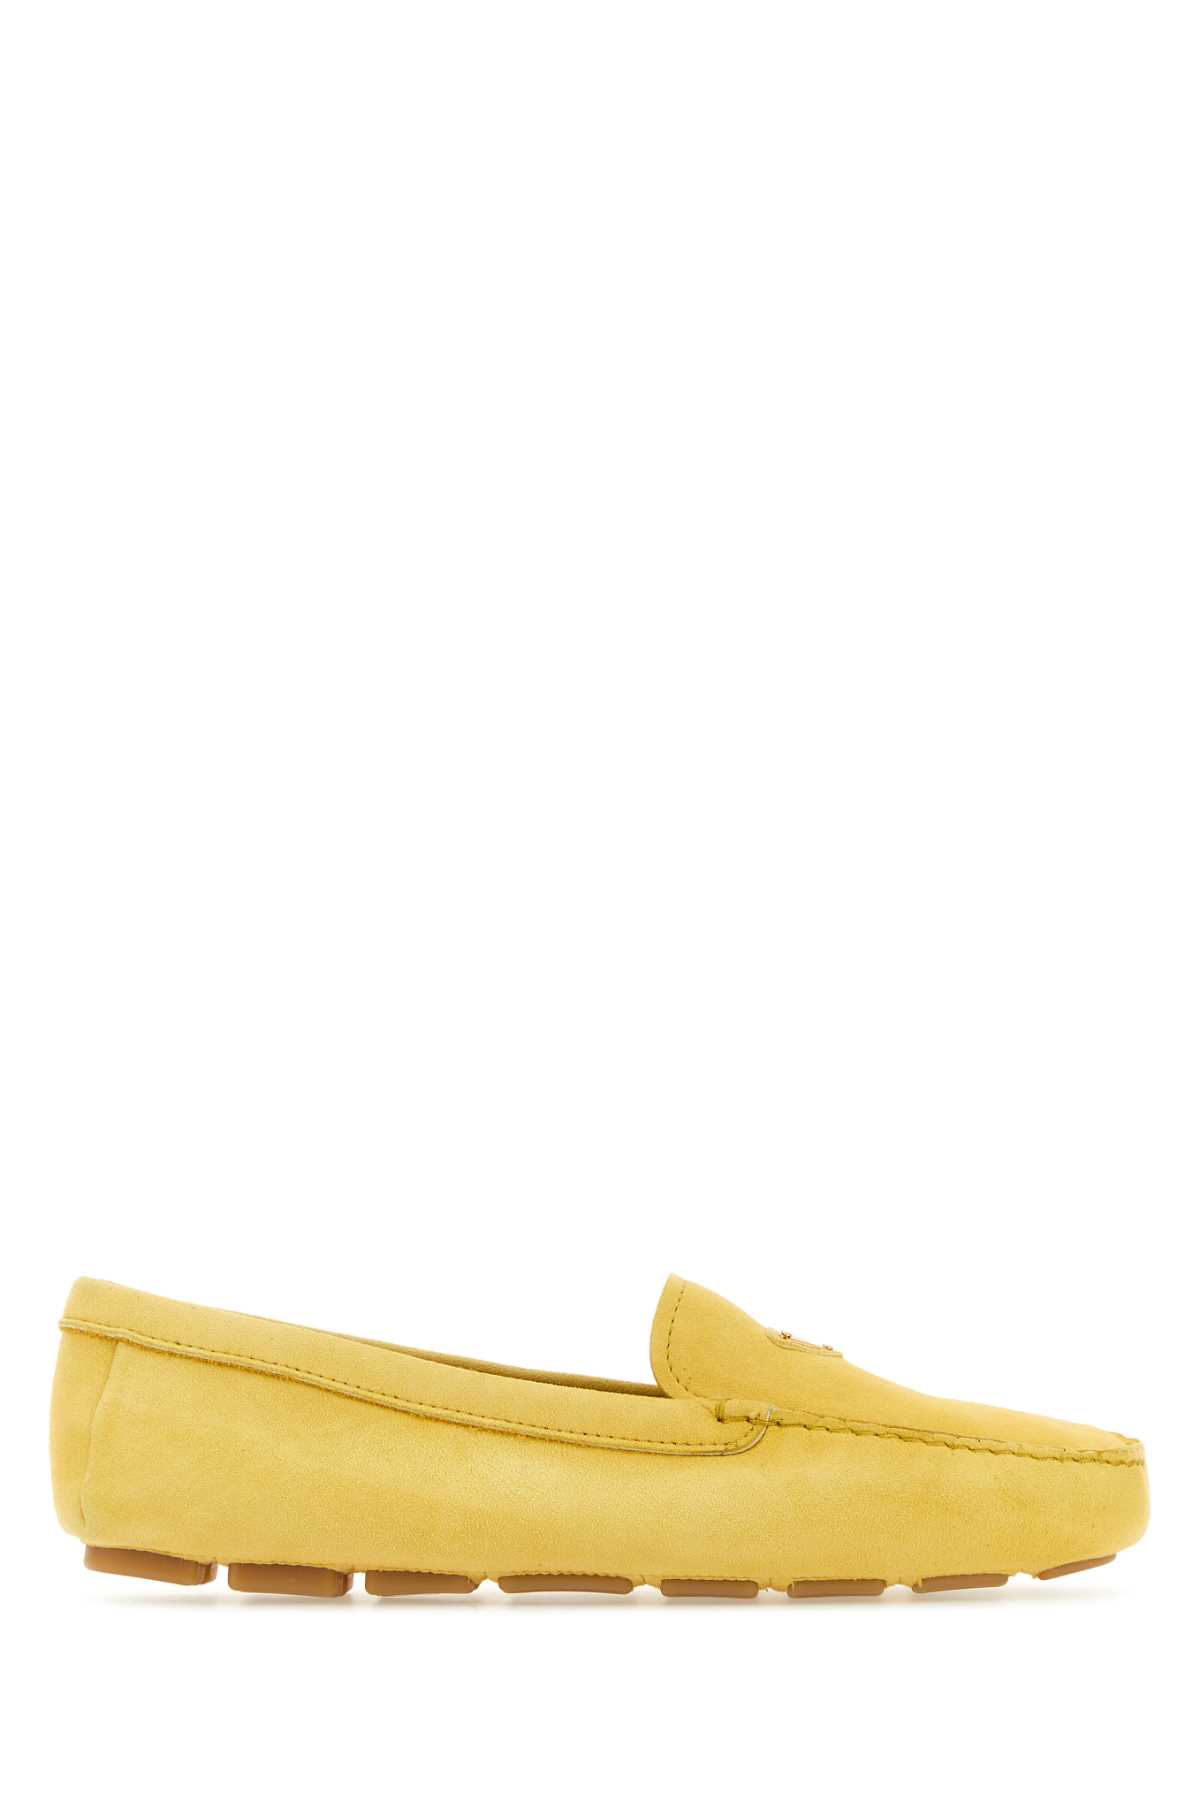 Prada Yellow Suede Loafers